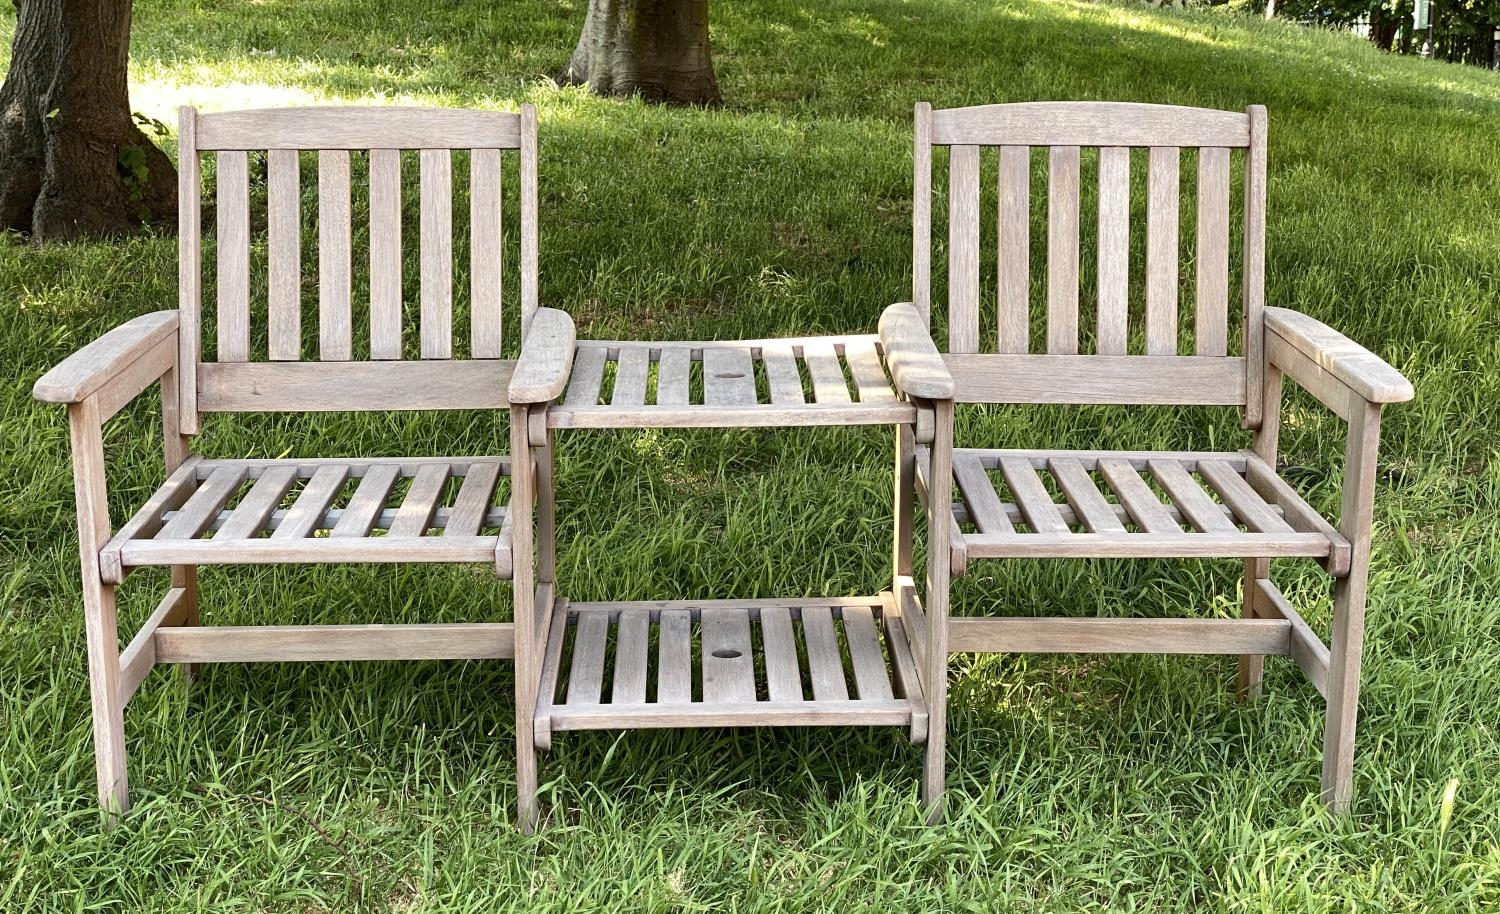 CONVERSATION GARDEN SEAT, weathered slatted teak with two armchairs and conjoining two tier table,